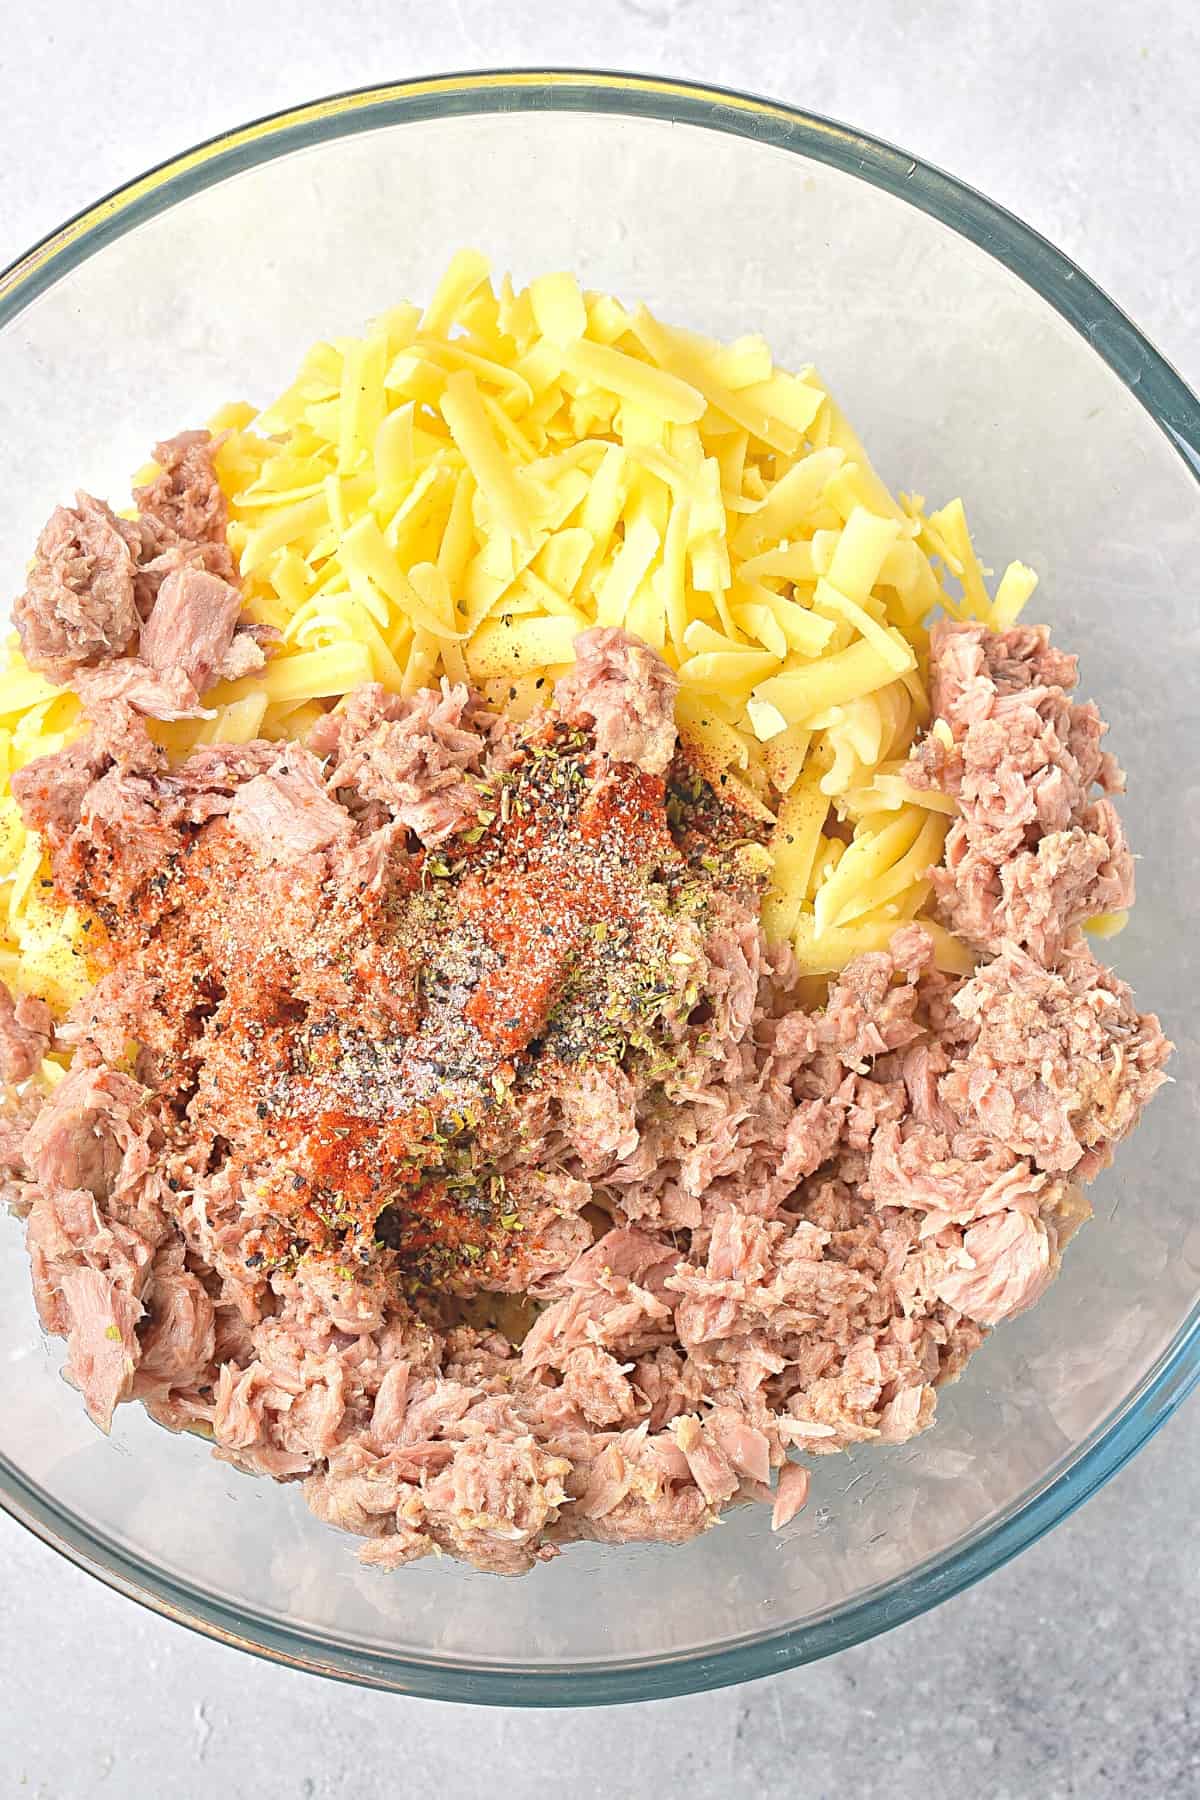 Canned tuna, shredded cheese and spices in a glass mixing bowl.